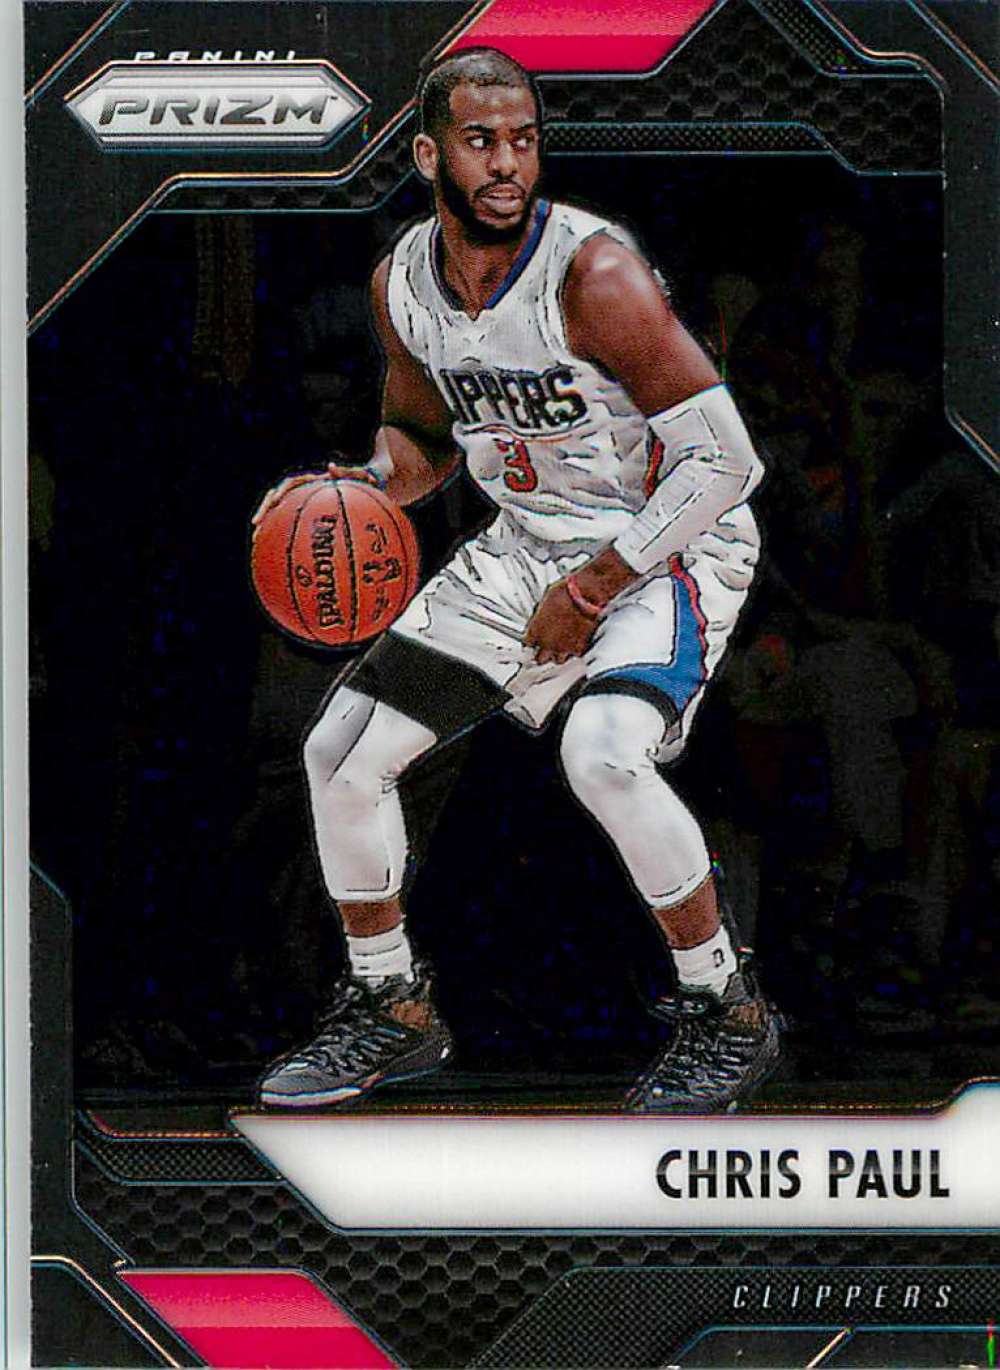 2016-17 Panini Prizm Basketball #51 Chris Paul Los Angeles Clippers Official NBA Trading Card